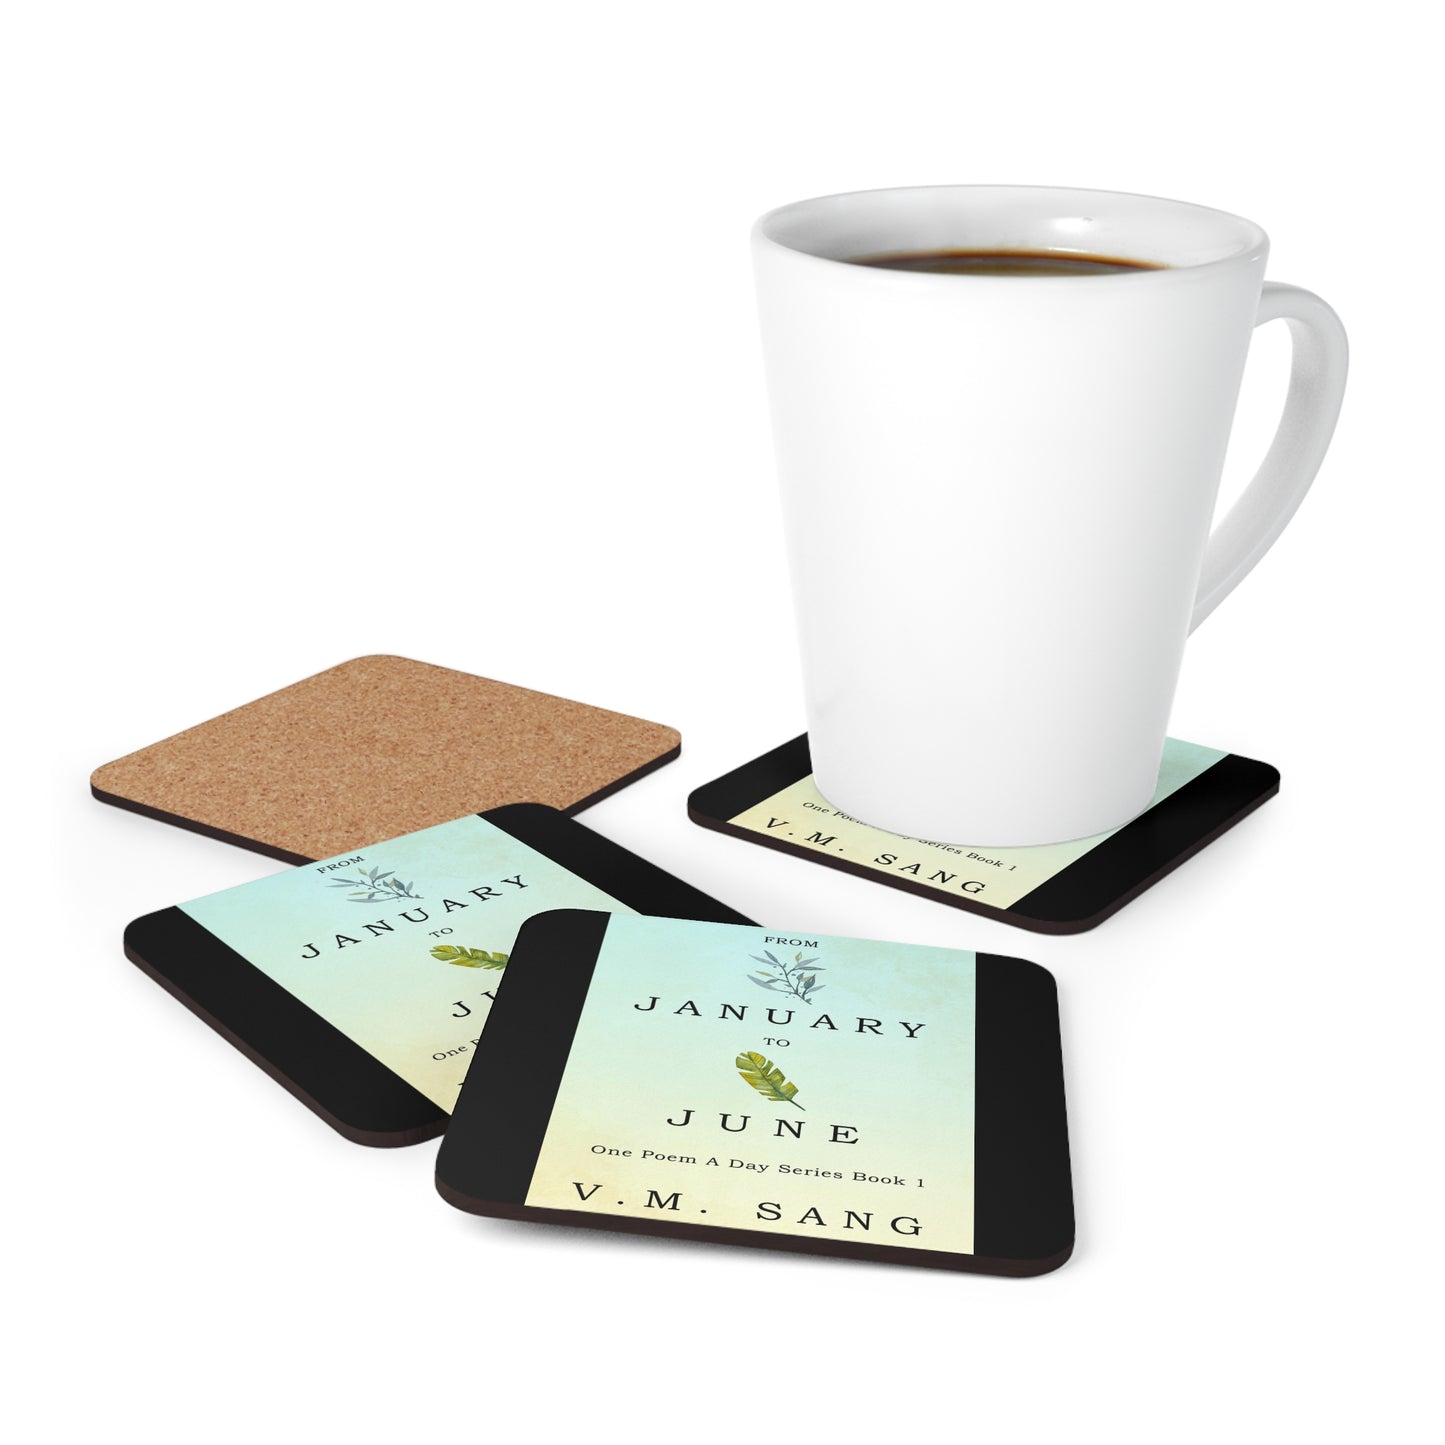 From January to June - Corkwood Coaster Set